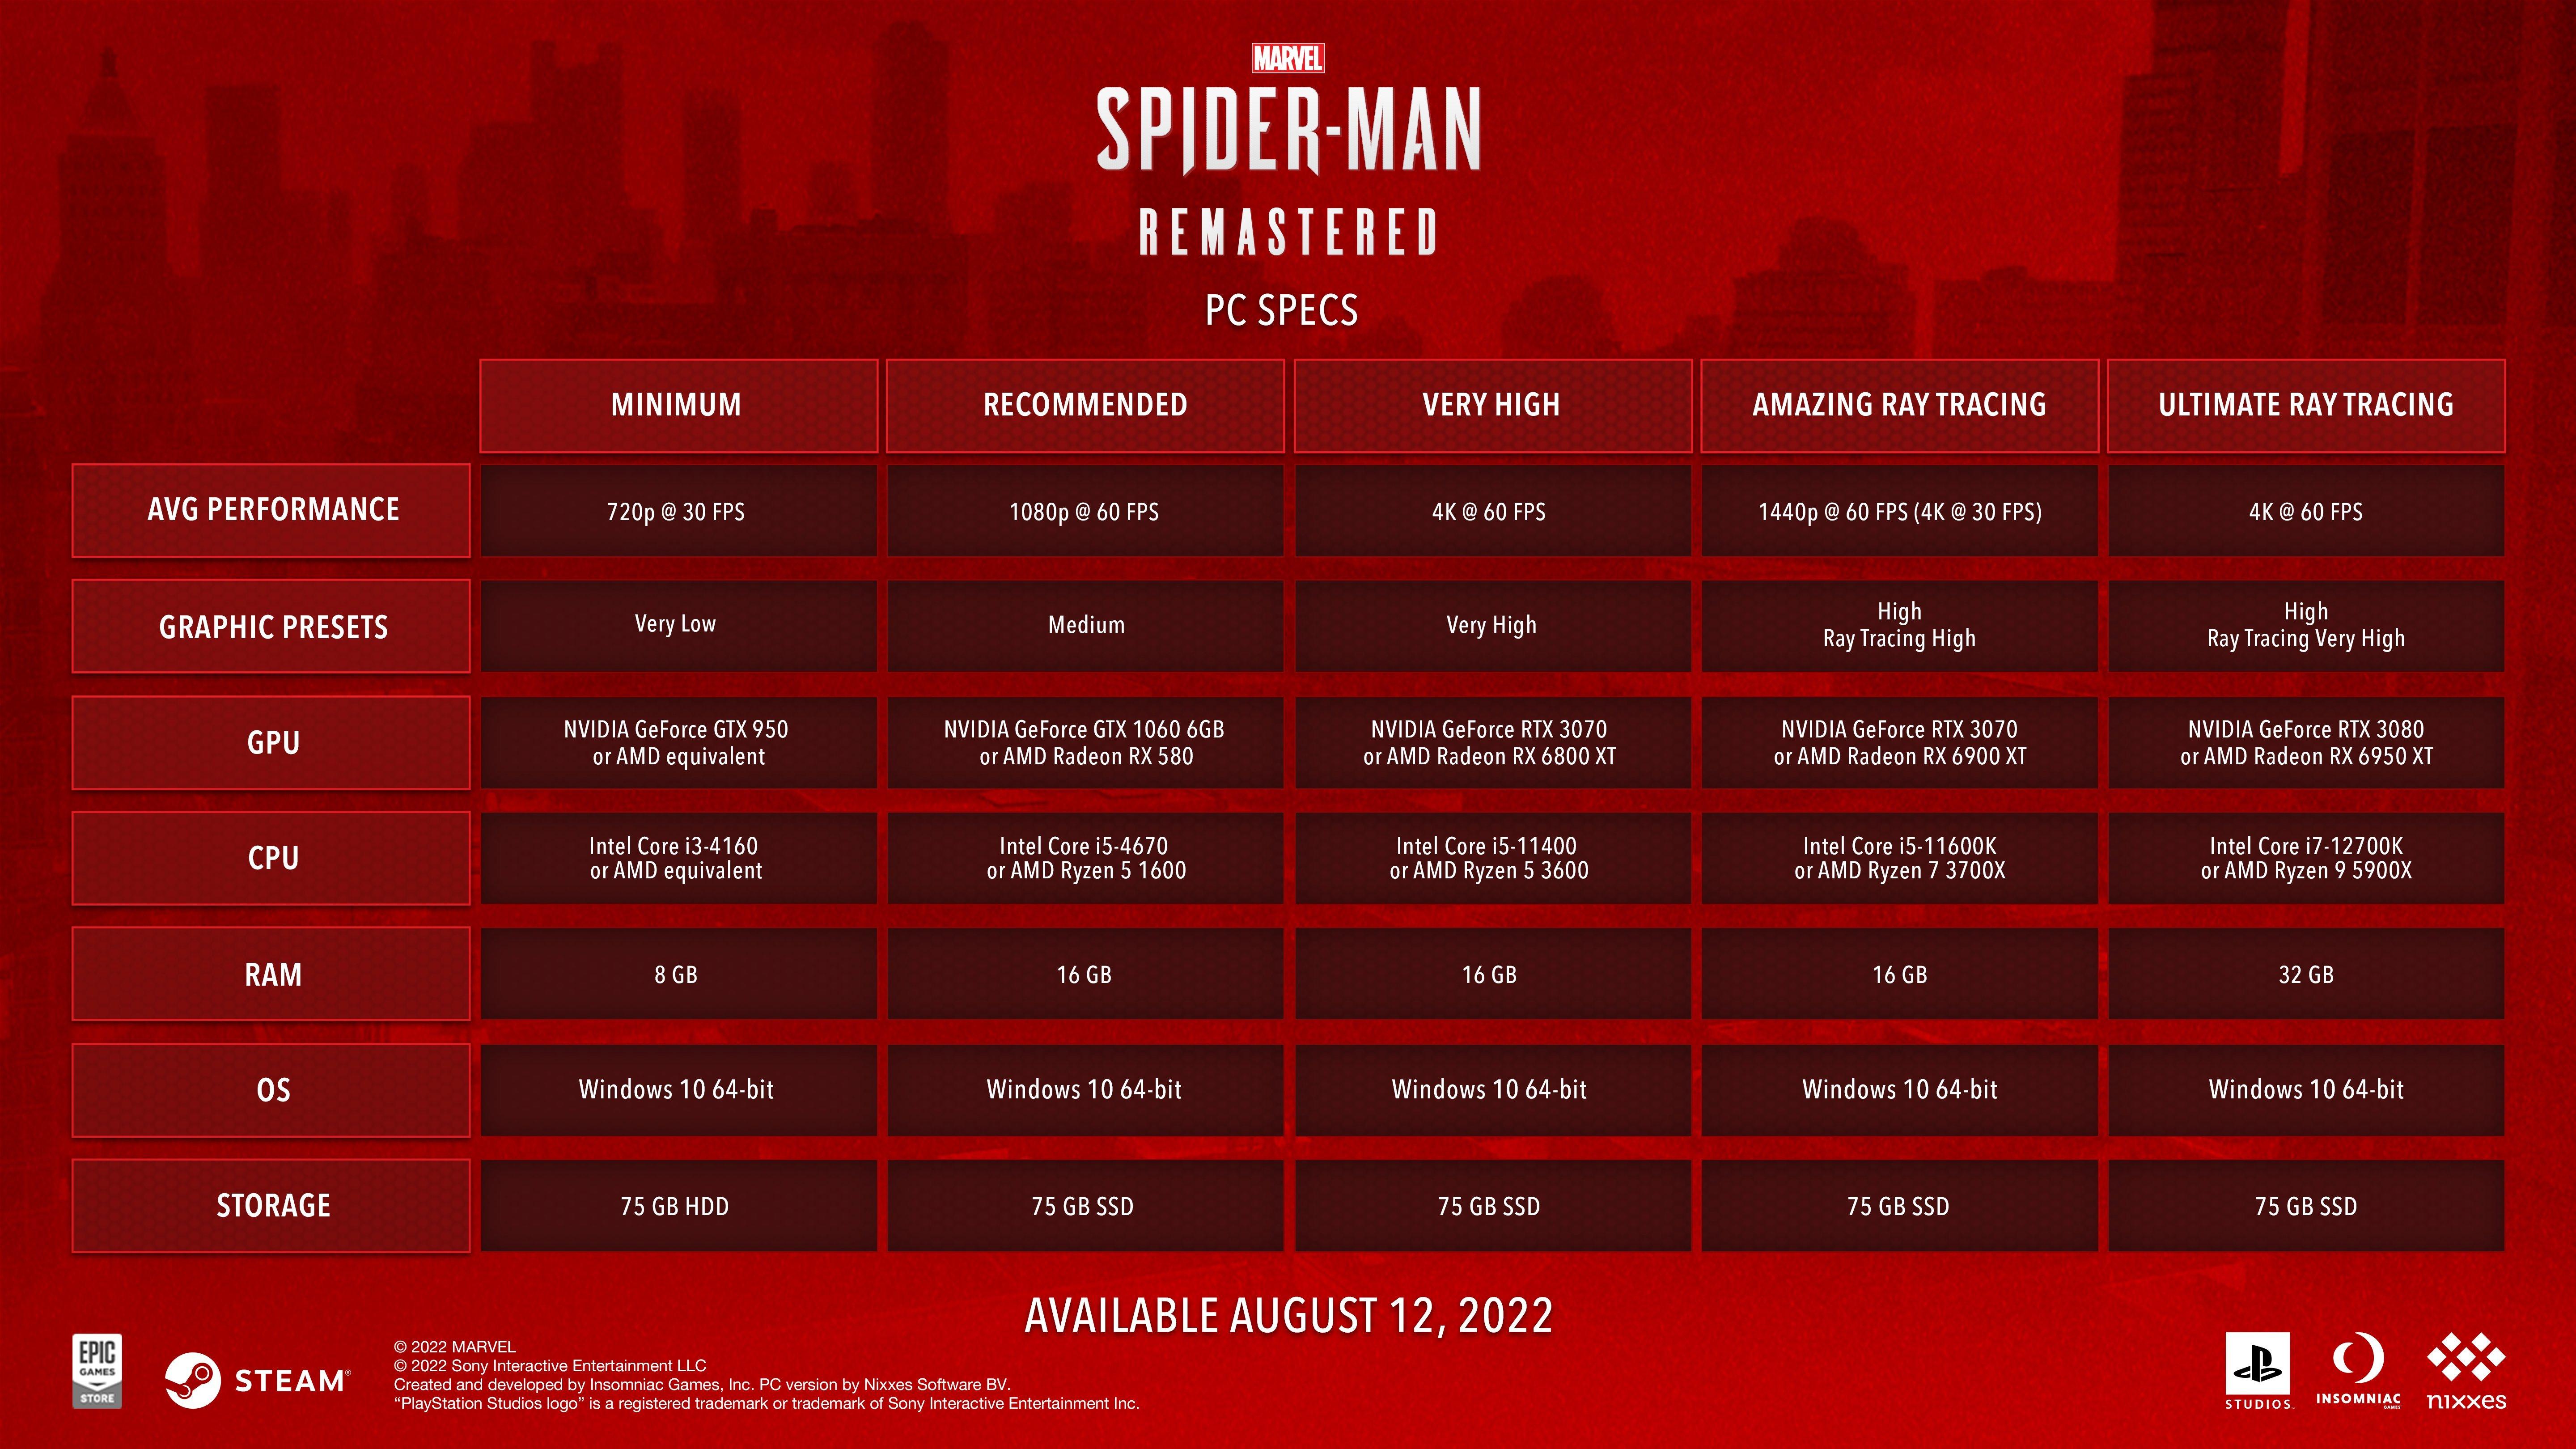 Marvel's Spider-Man Remastered PC: What are the system requirements?